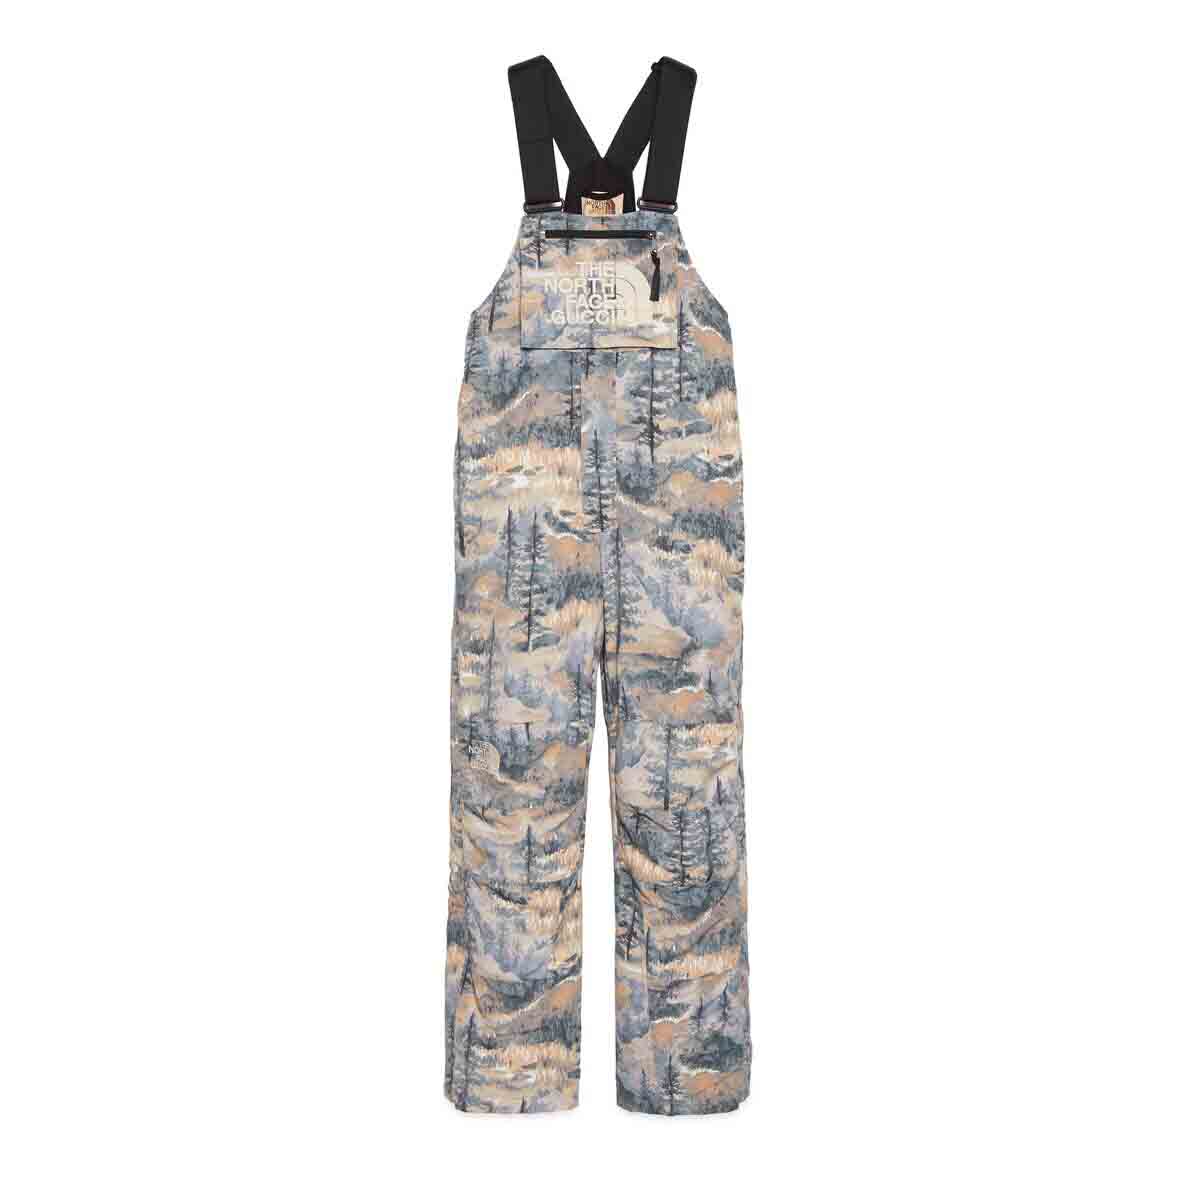 Gucci x The North Face Jumpsuit Forest Print